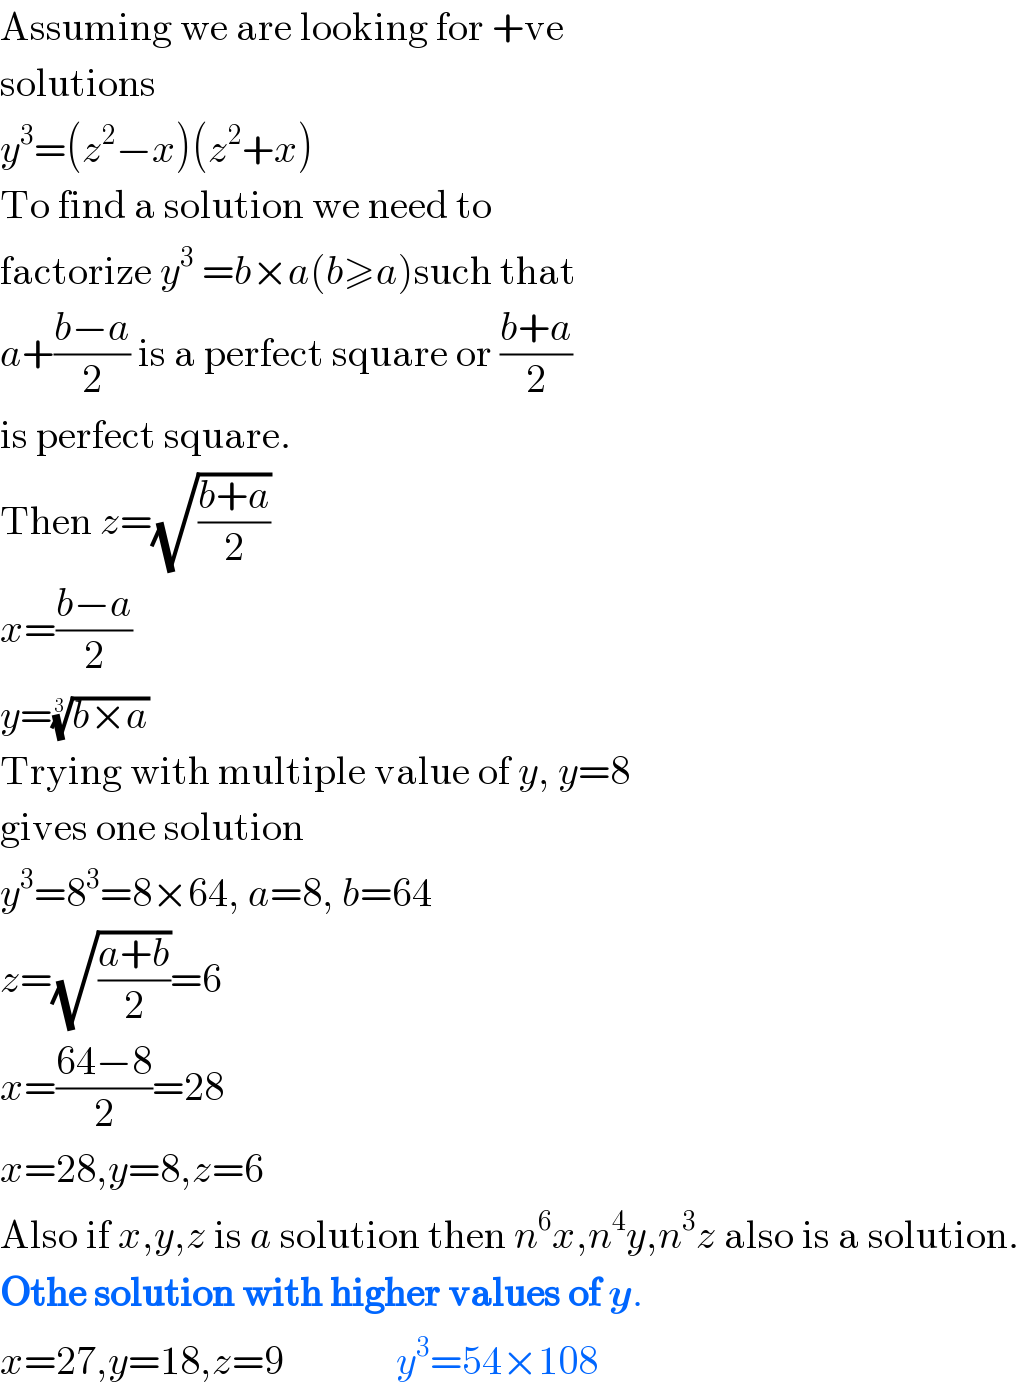 Assuming we are looking for +ve  solutions  y^3 =(z^2 −x)(z^2 +x)  To find a solution we need to  factorize y^3  =b×a(b≥a)such that  a+((b−a)/2) is a perfect square or ((b+a)/2)  is perfect square.  Then z=(√((b+a)/2))  x=((b−a)/2)  y=((b×a))^(1/3)    Trying with multiple value of y, y=8  gives one solution  y^3 =8^3 =8×64, a=8, b=64  z=(√((a+b)/2))=6  x=((64−8)/2)=28  x=28,y=8,z=6  Also if x,y,z is a solution then n^6 x,n^4 y,n^3 z also is a solution.  Othe solution with higher values of y.  x=27,y=18,z=9              y^3 =54×108  